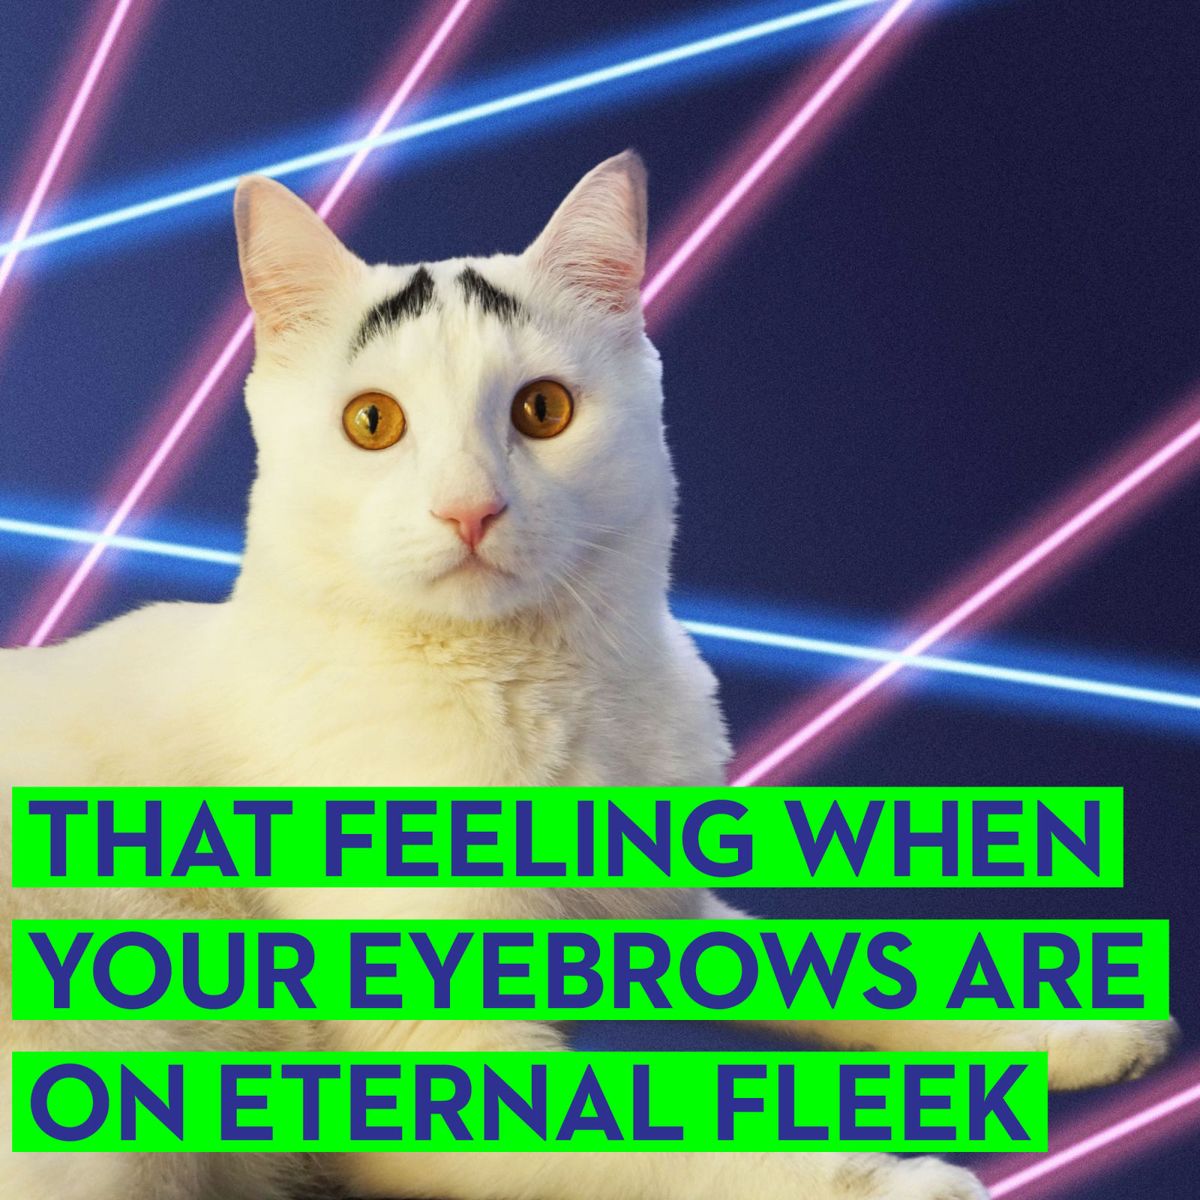 6 Funny Cat Memes - Best Cat Memes From Hamilton the Hipster and Sam Has  Eyebrows